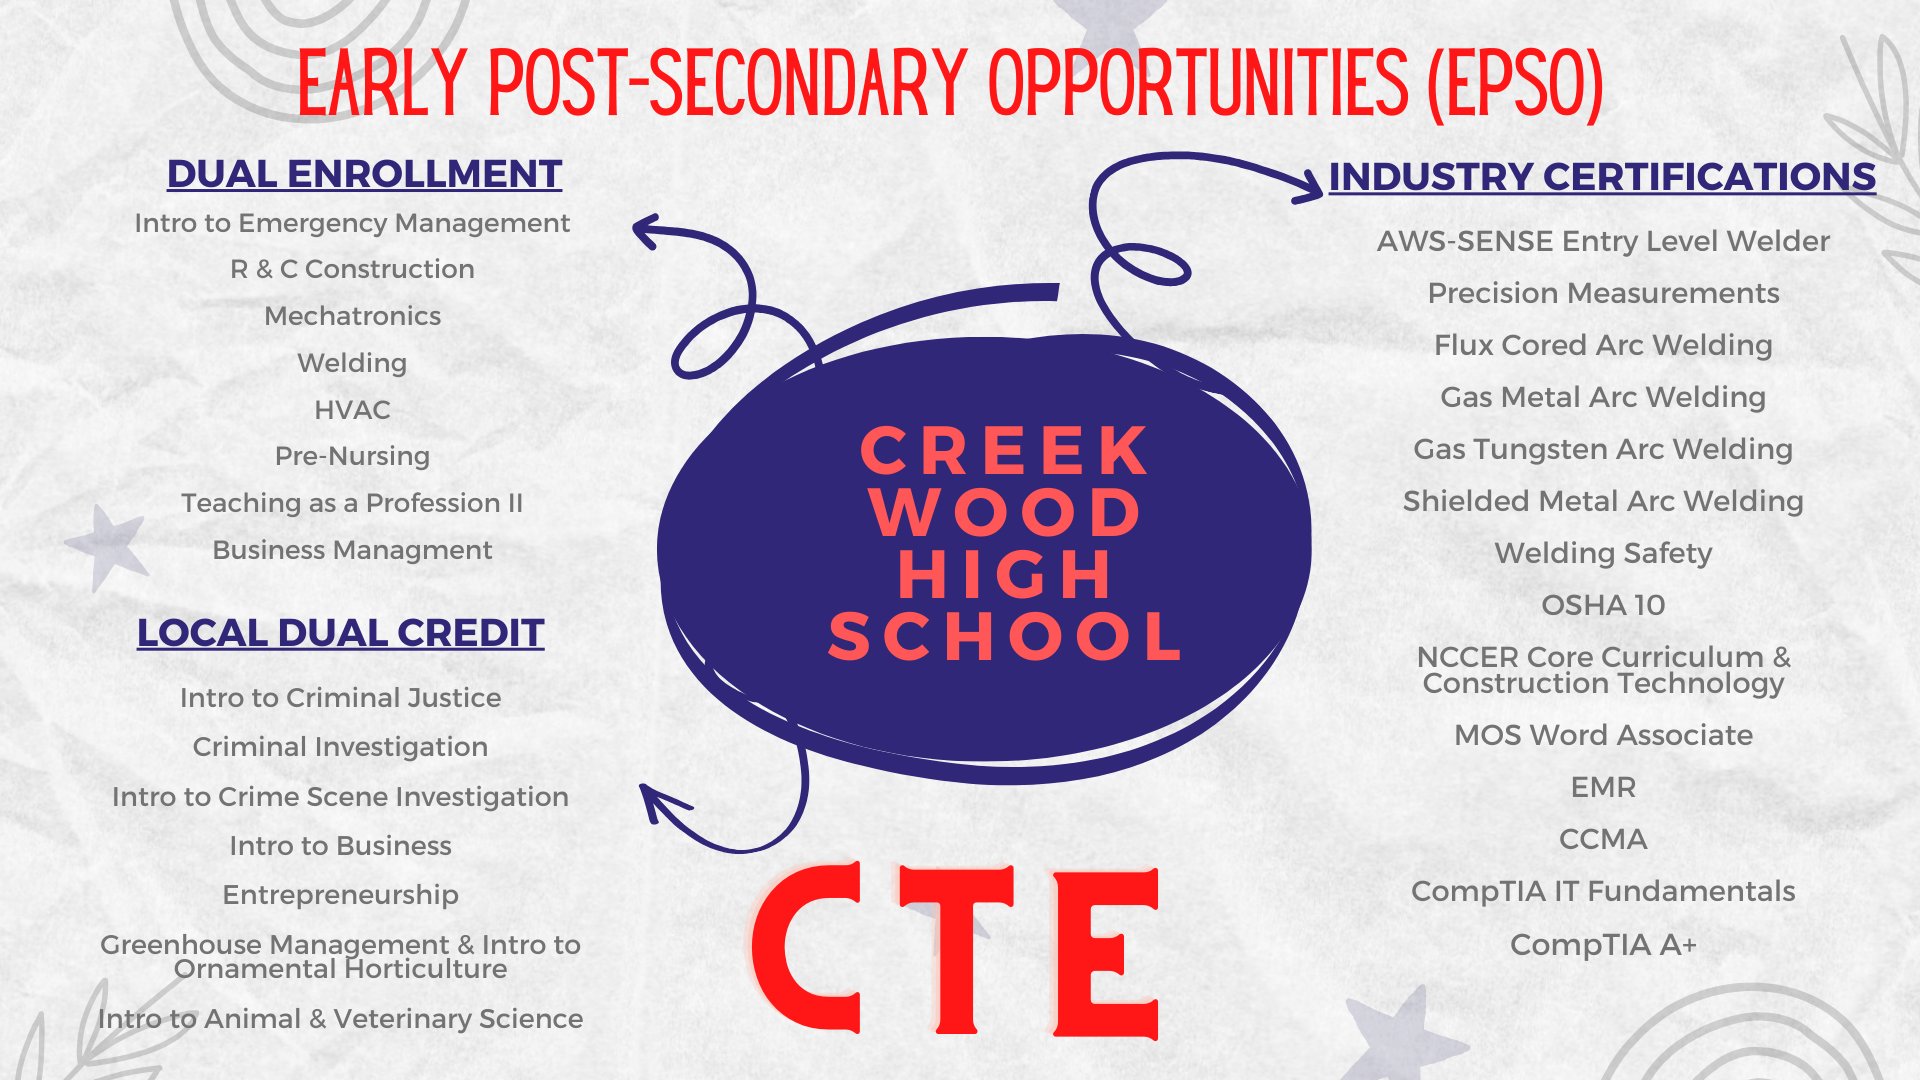 Early Postsecondary Opportunities / Early Postsecondary Opportunities